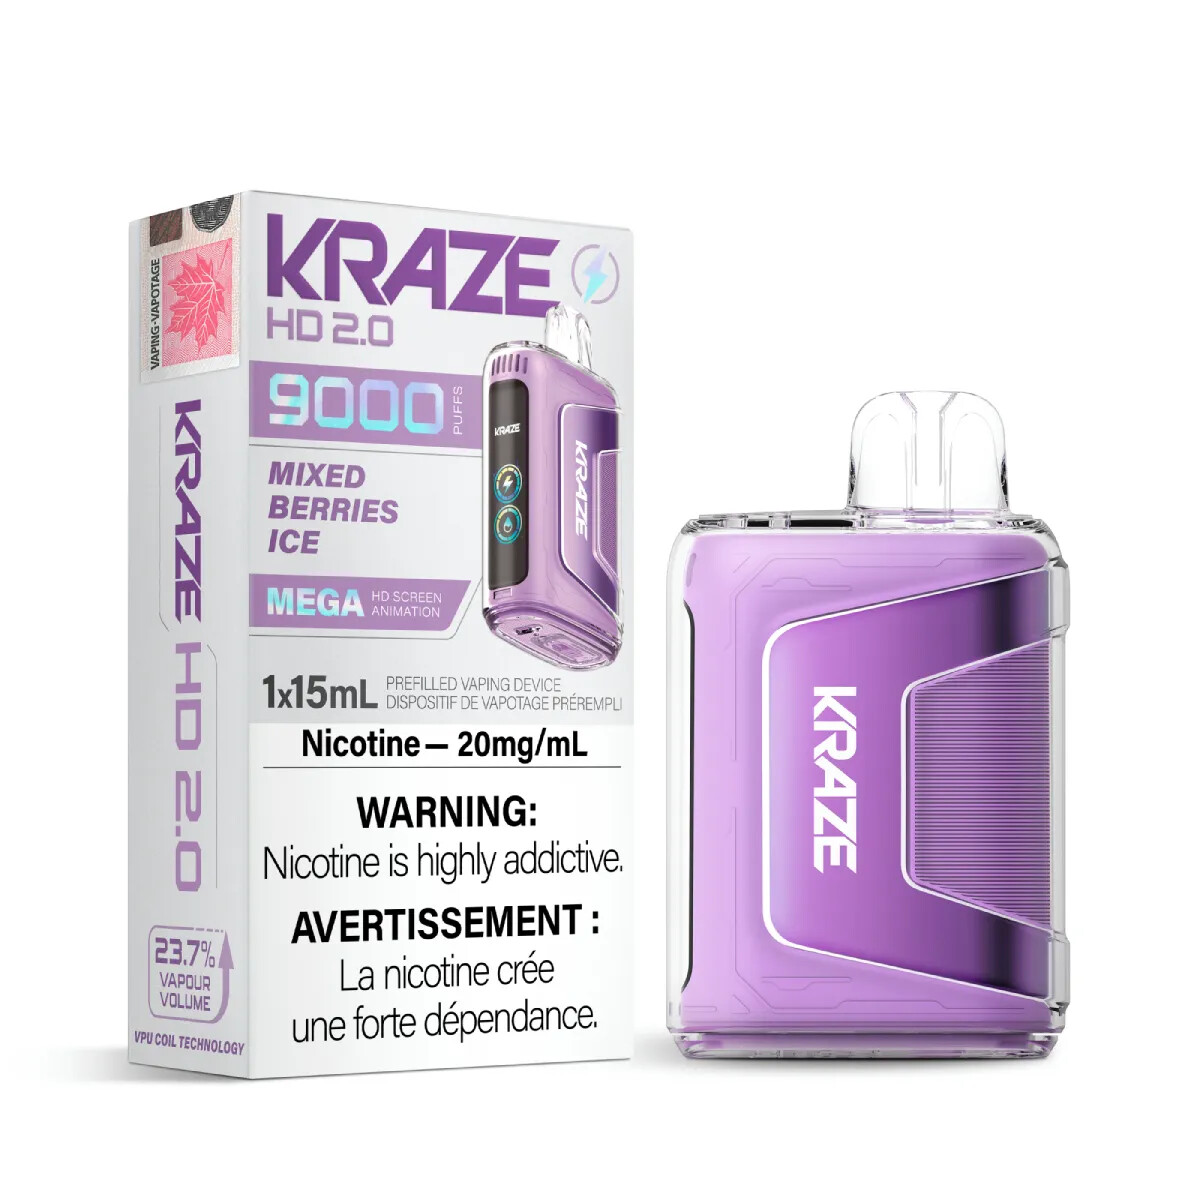 Mixed Berries Ice - Kraze HD 2.0 Disposable